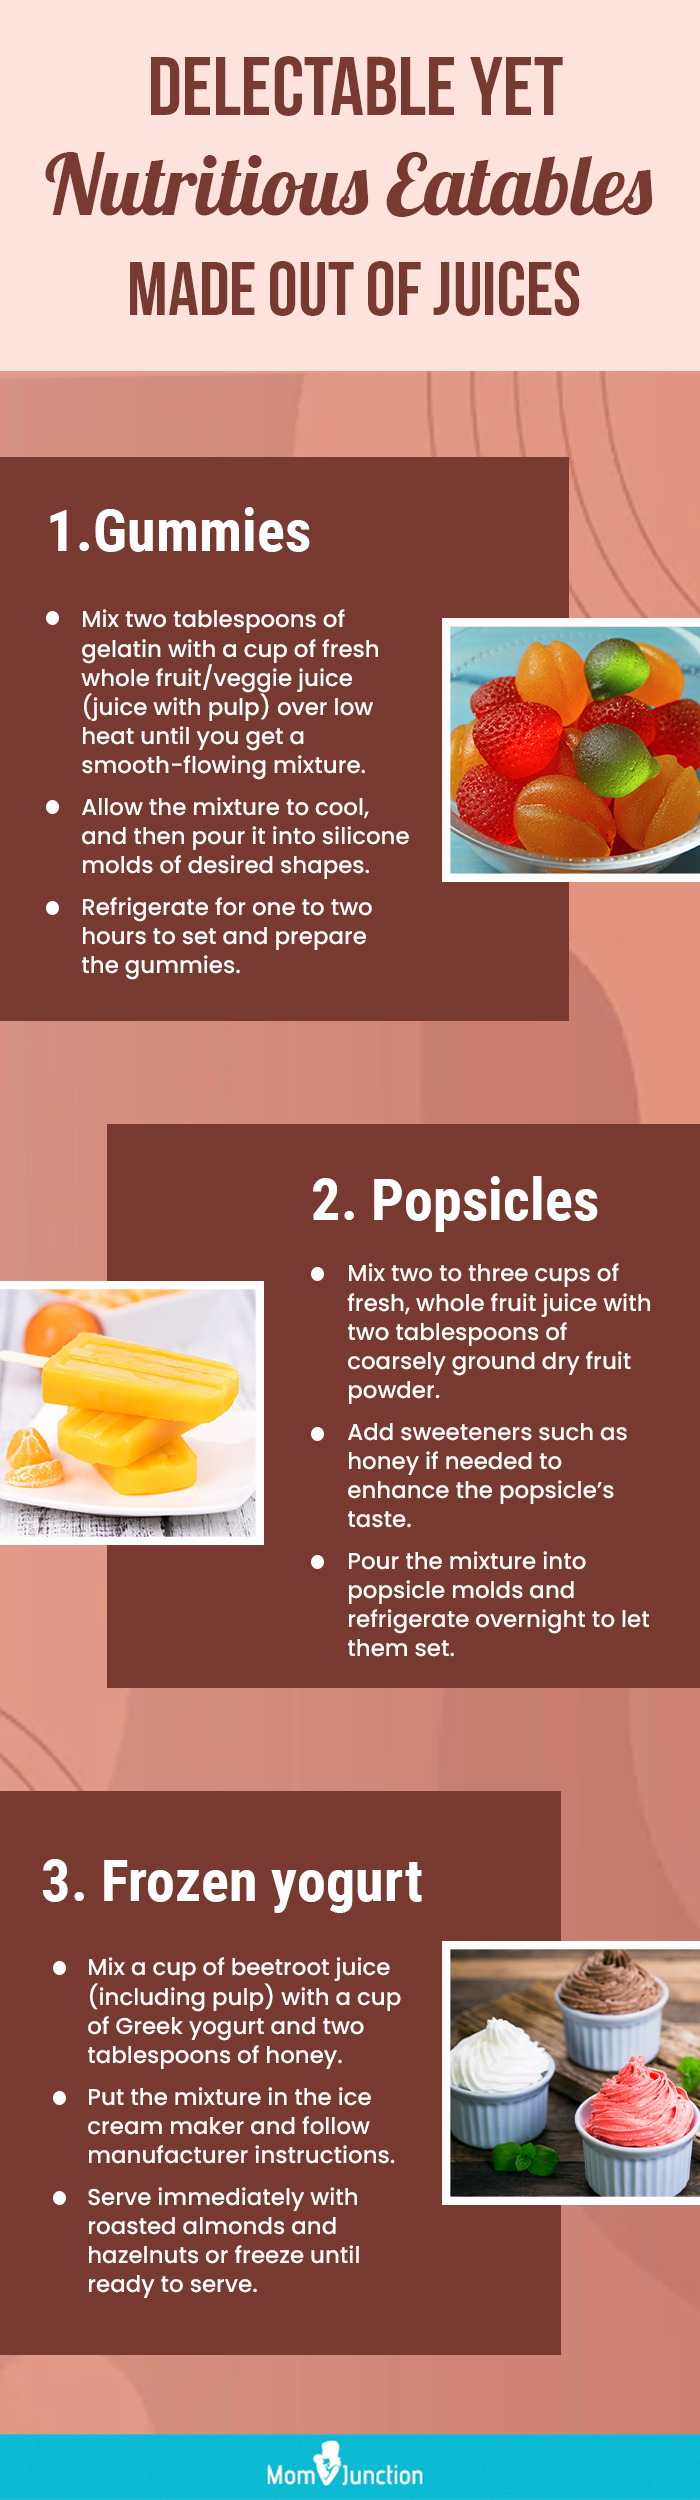 homemade juices for children (infographic)